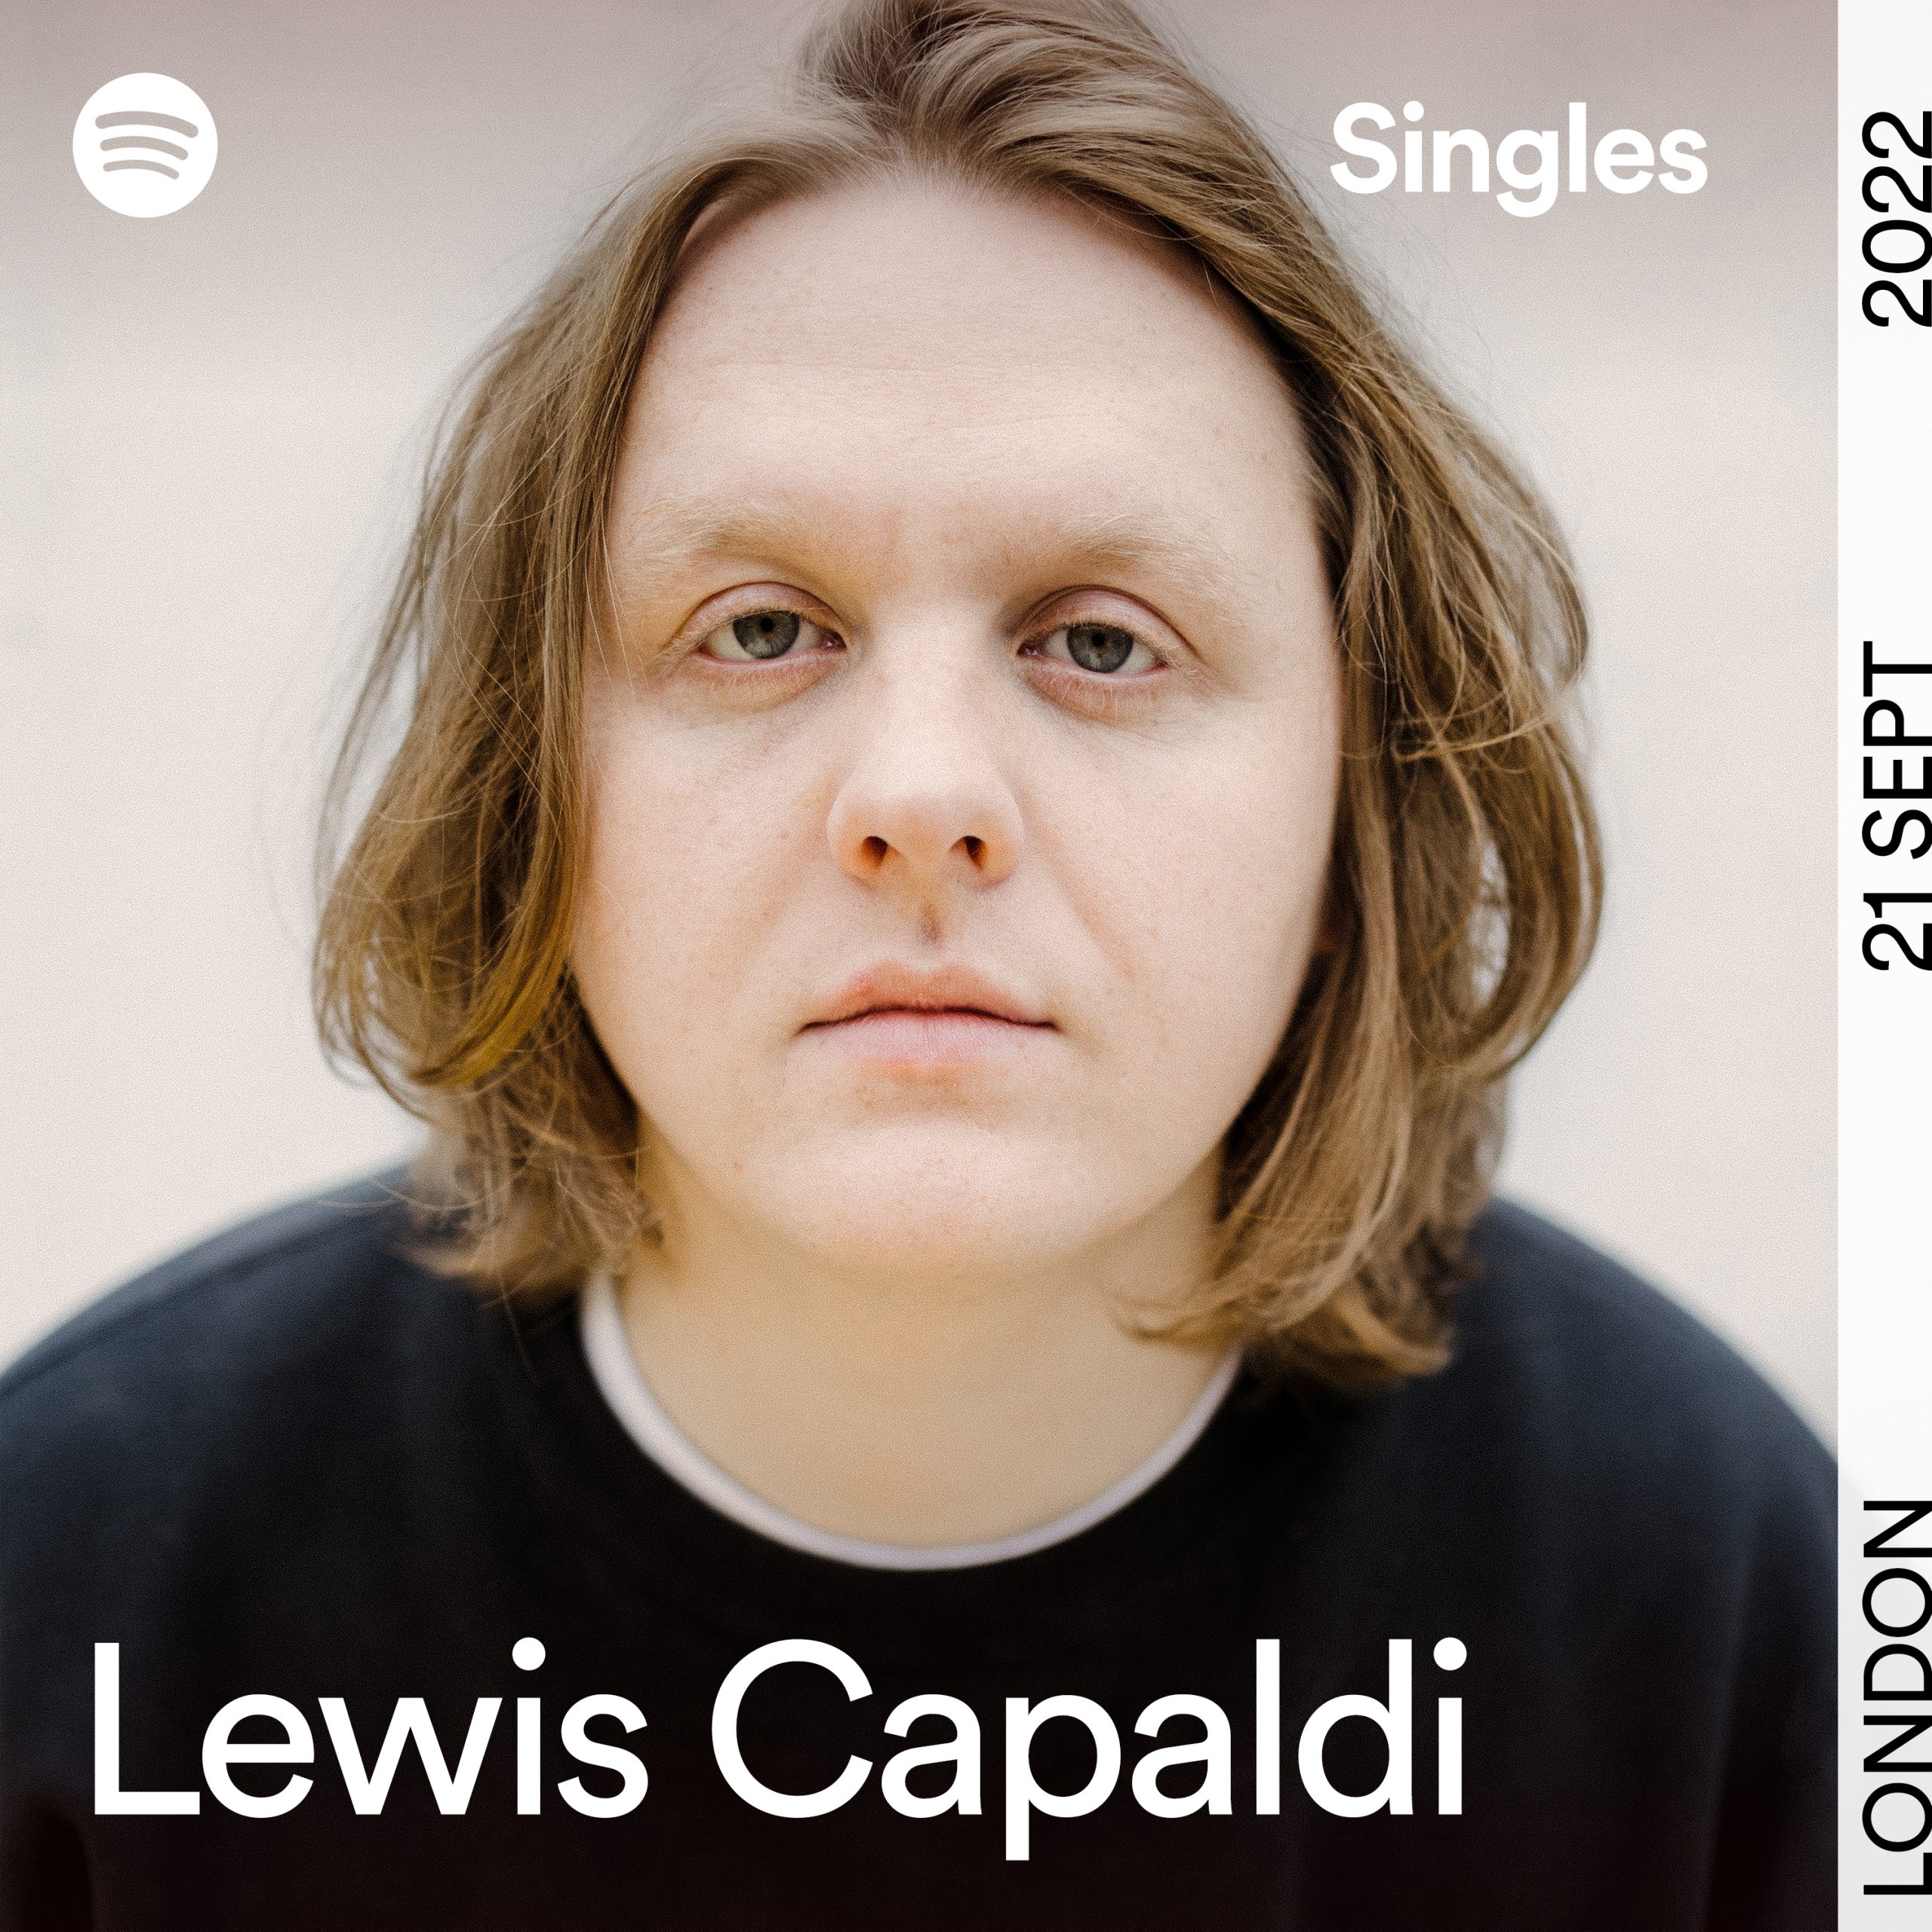 a photograph of lewis capaldi looking at the camera